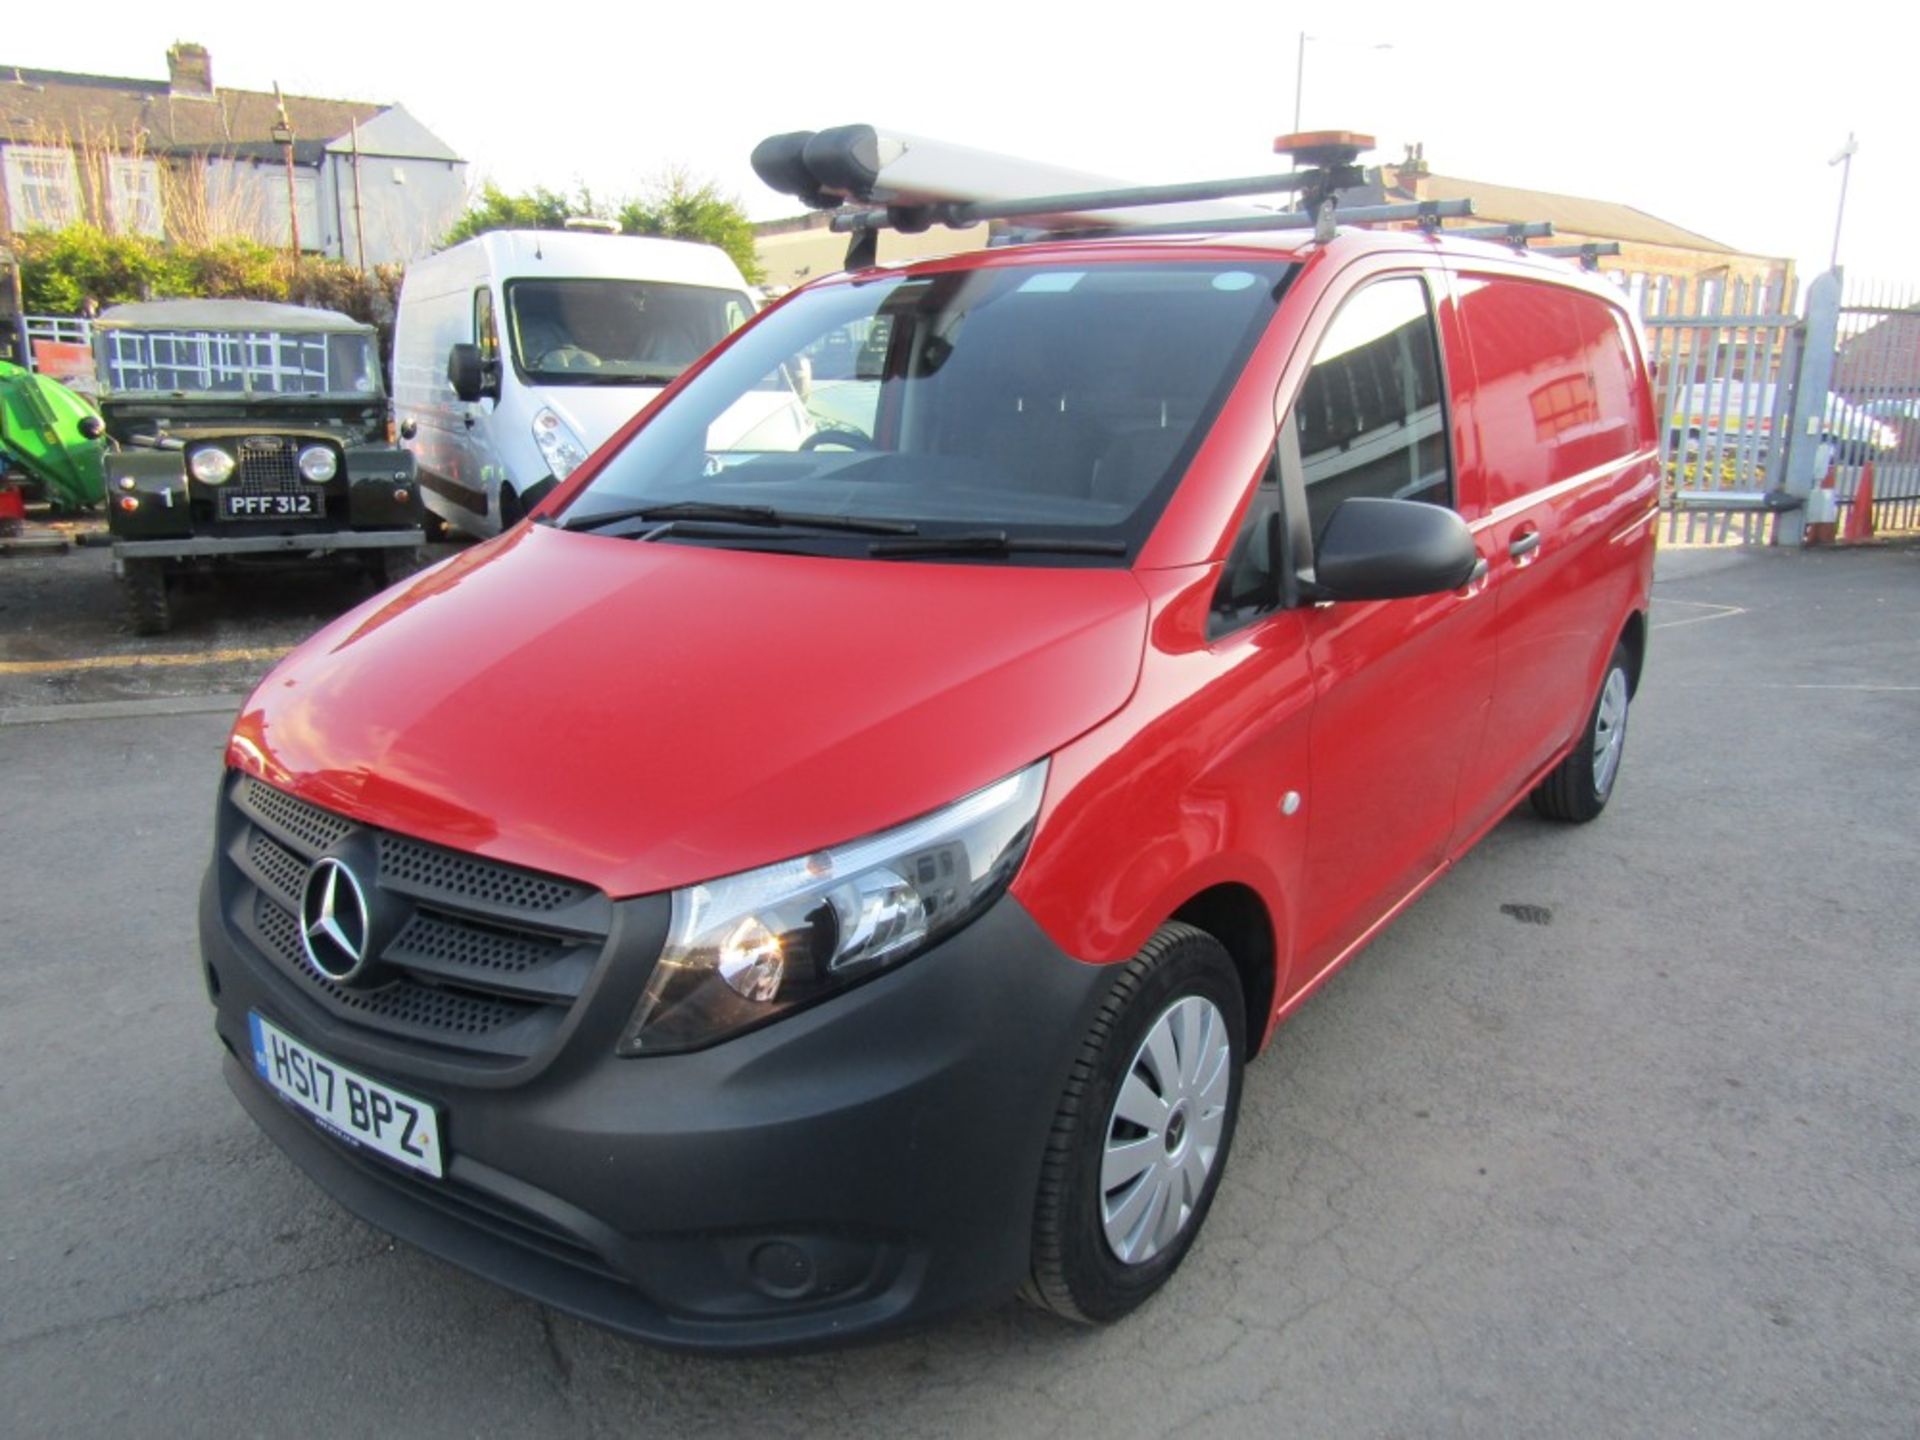 17 reg MERCEDES VITO 109 CDI COMPACT, AIR CON, SAT NAV, BLUE TOOTH, RACKING IN REAR, 1ST REG 07/ - Image 2 of 7